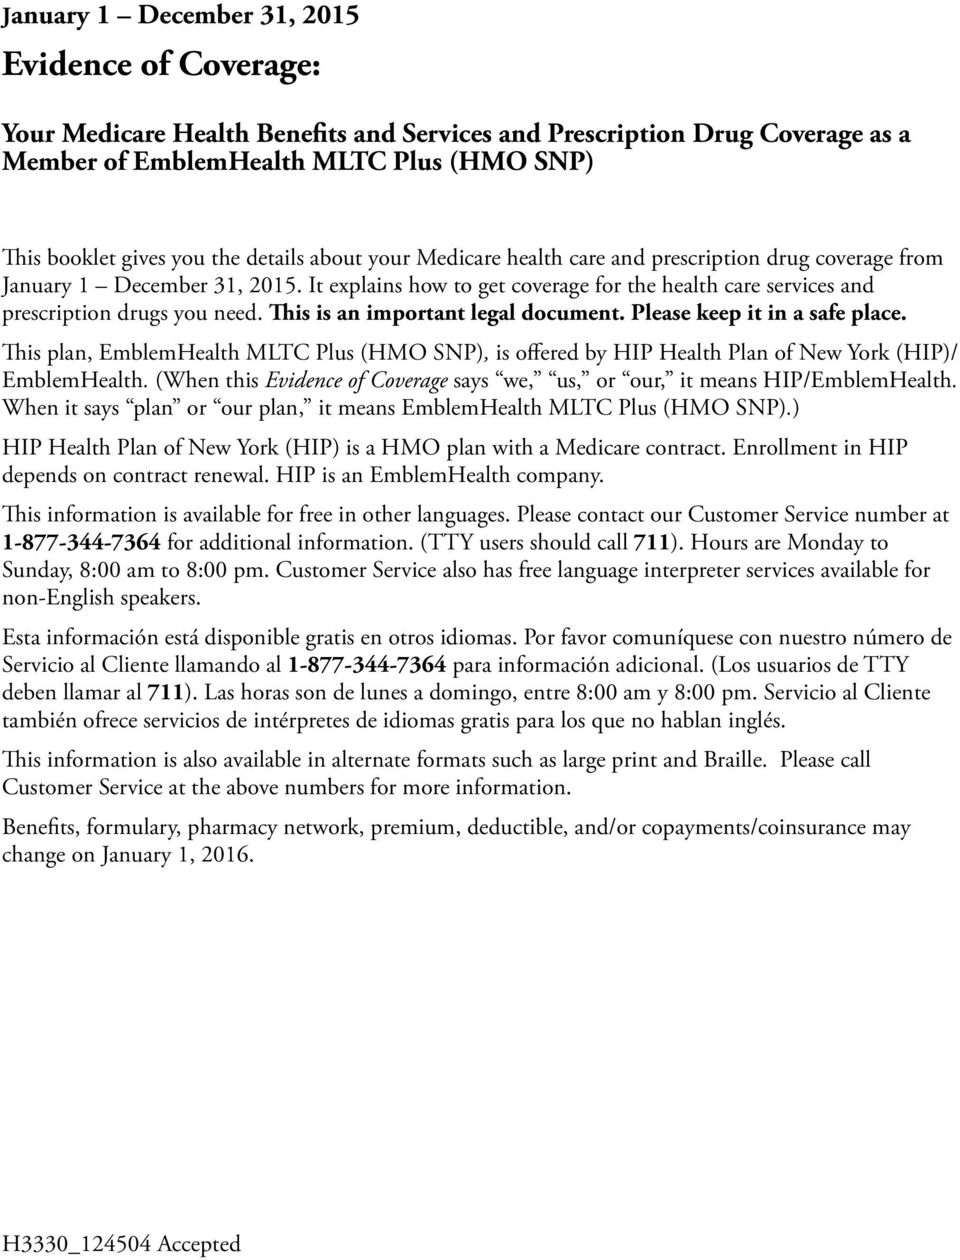 This is an important legal document. Please keep it in a safe place. This plan, EmblemHealth MLTC Plus (HMO SNP), is offered by HIP Health Plan of New York (HIP)/ EmblemHealth.